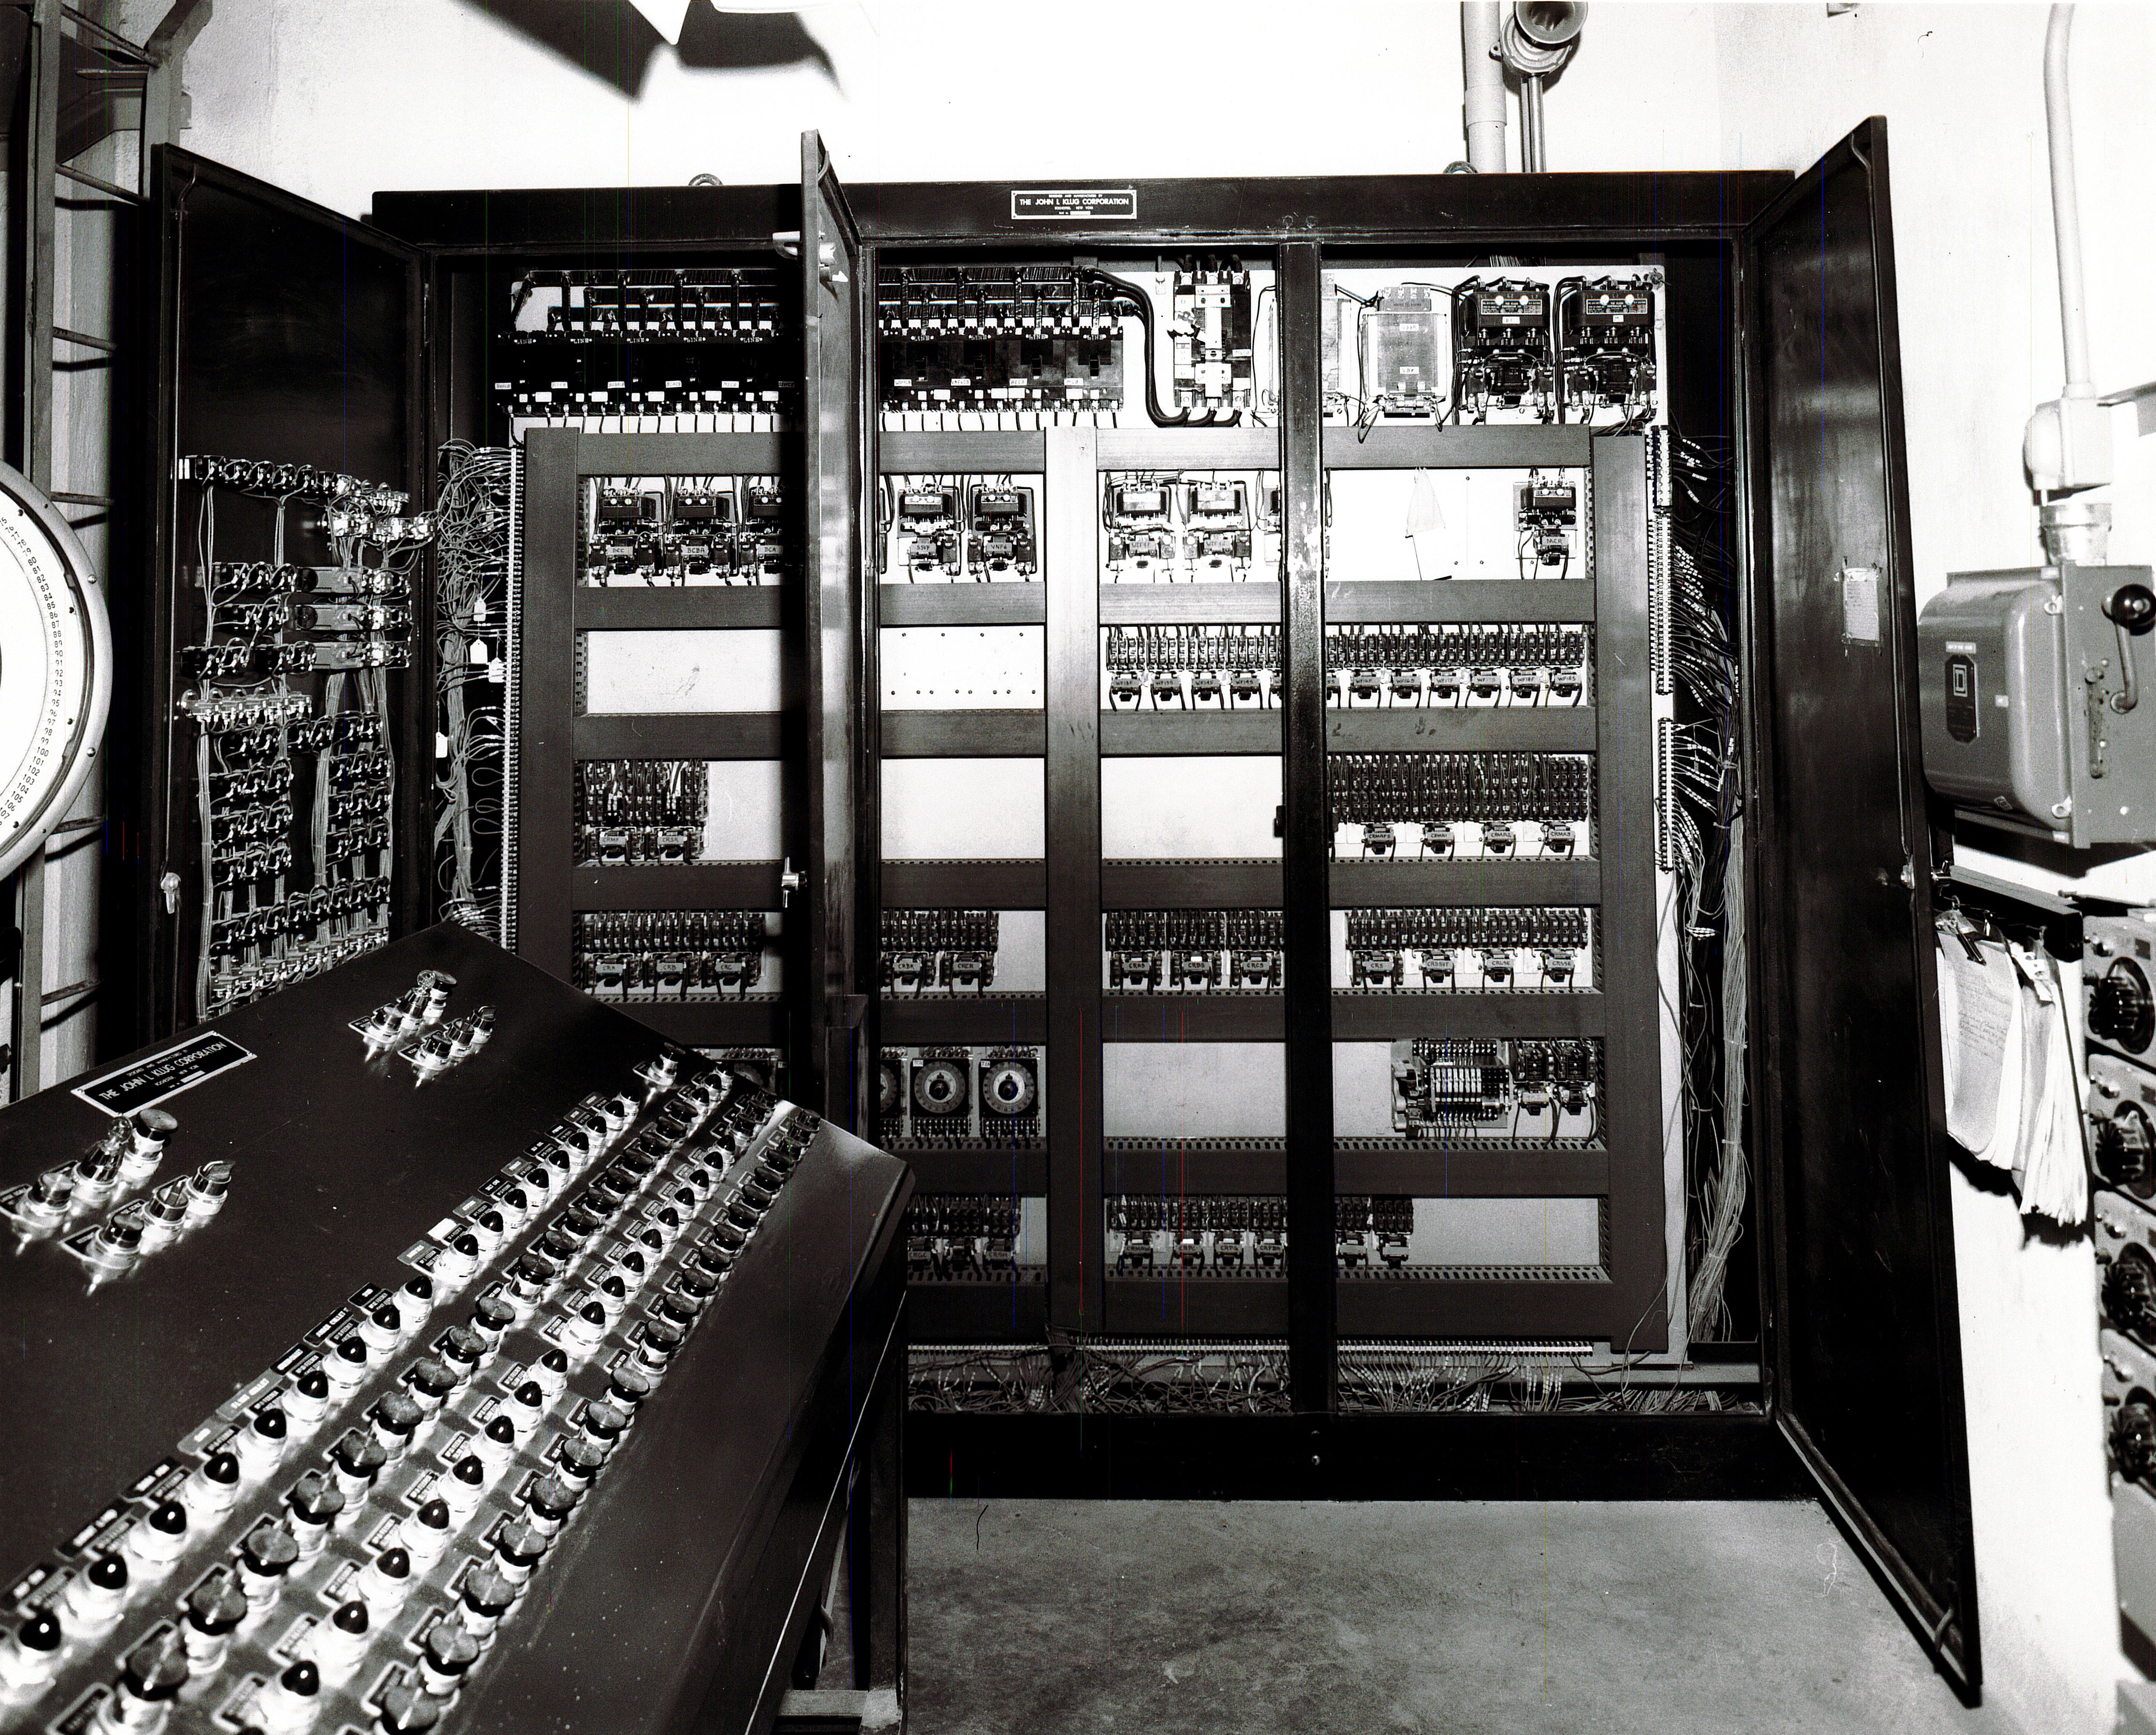 An early “pushbutton” Klug control system. 1950s